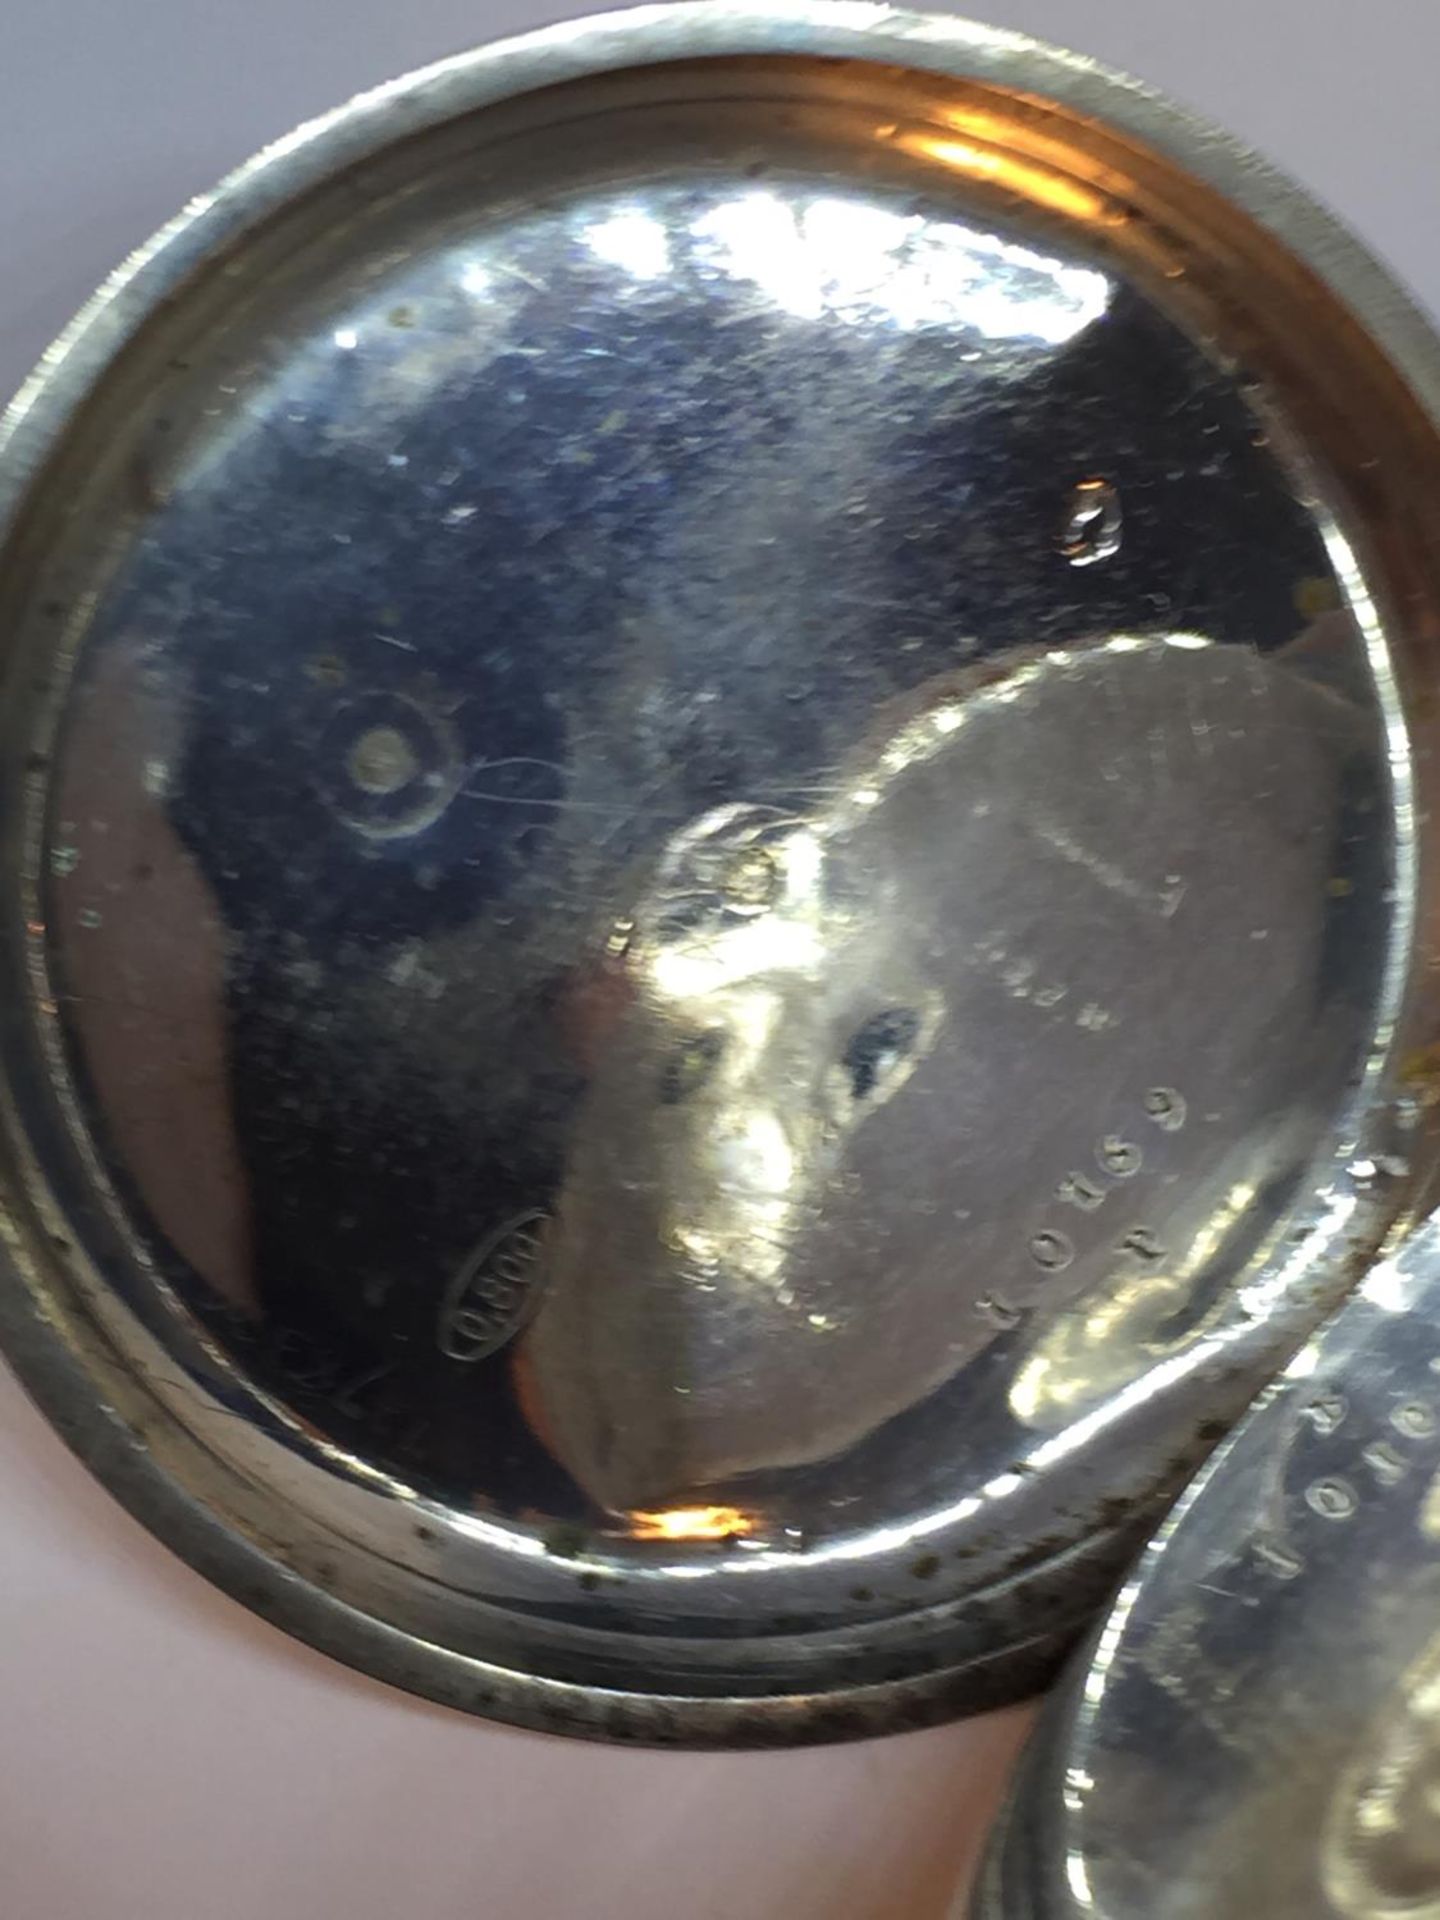 A MARKED 800 SILVER POCKET WATCH SEEN WORKING BUT NO WARRANTY - Image 4 of 4